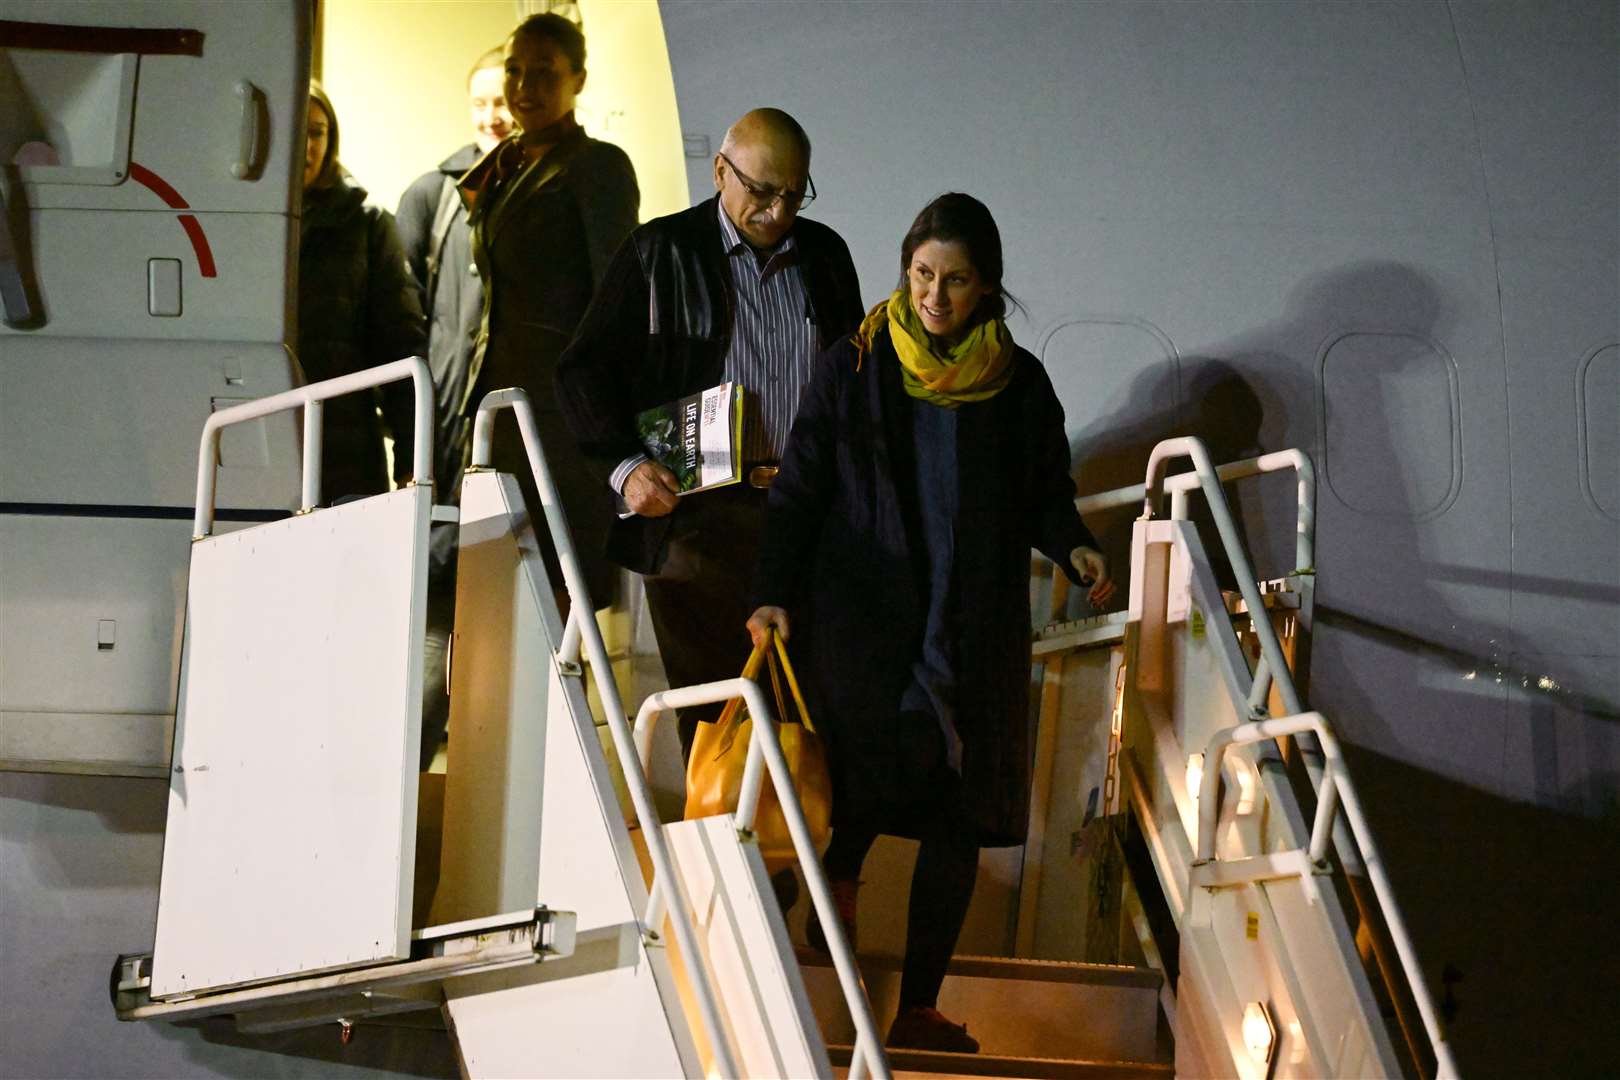 Ms Zaghari-Ratcliffe and Anoosheh Ashoori arrive at Brize Norton after they was freed from detention by Iranian authorities in March (PA)